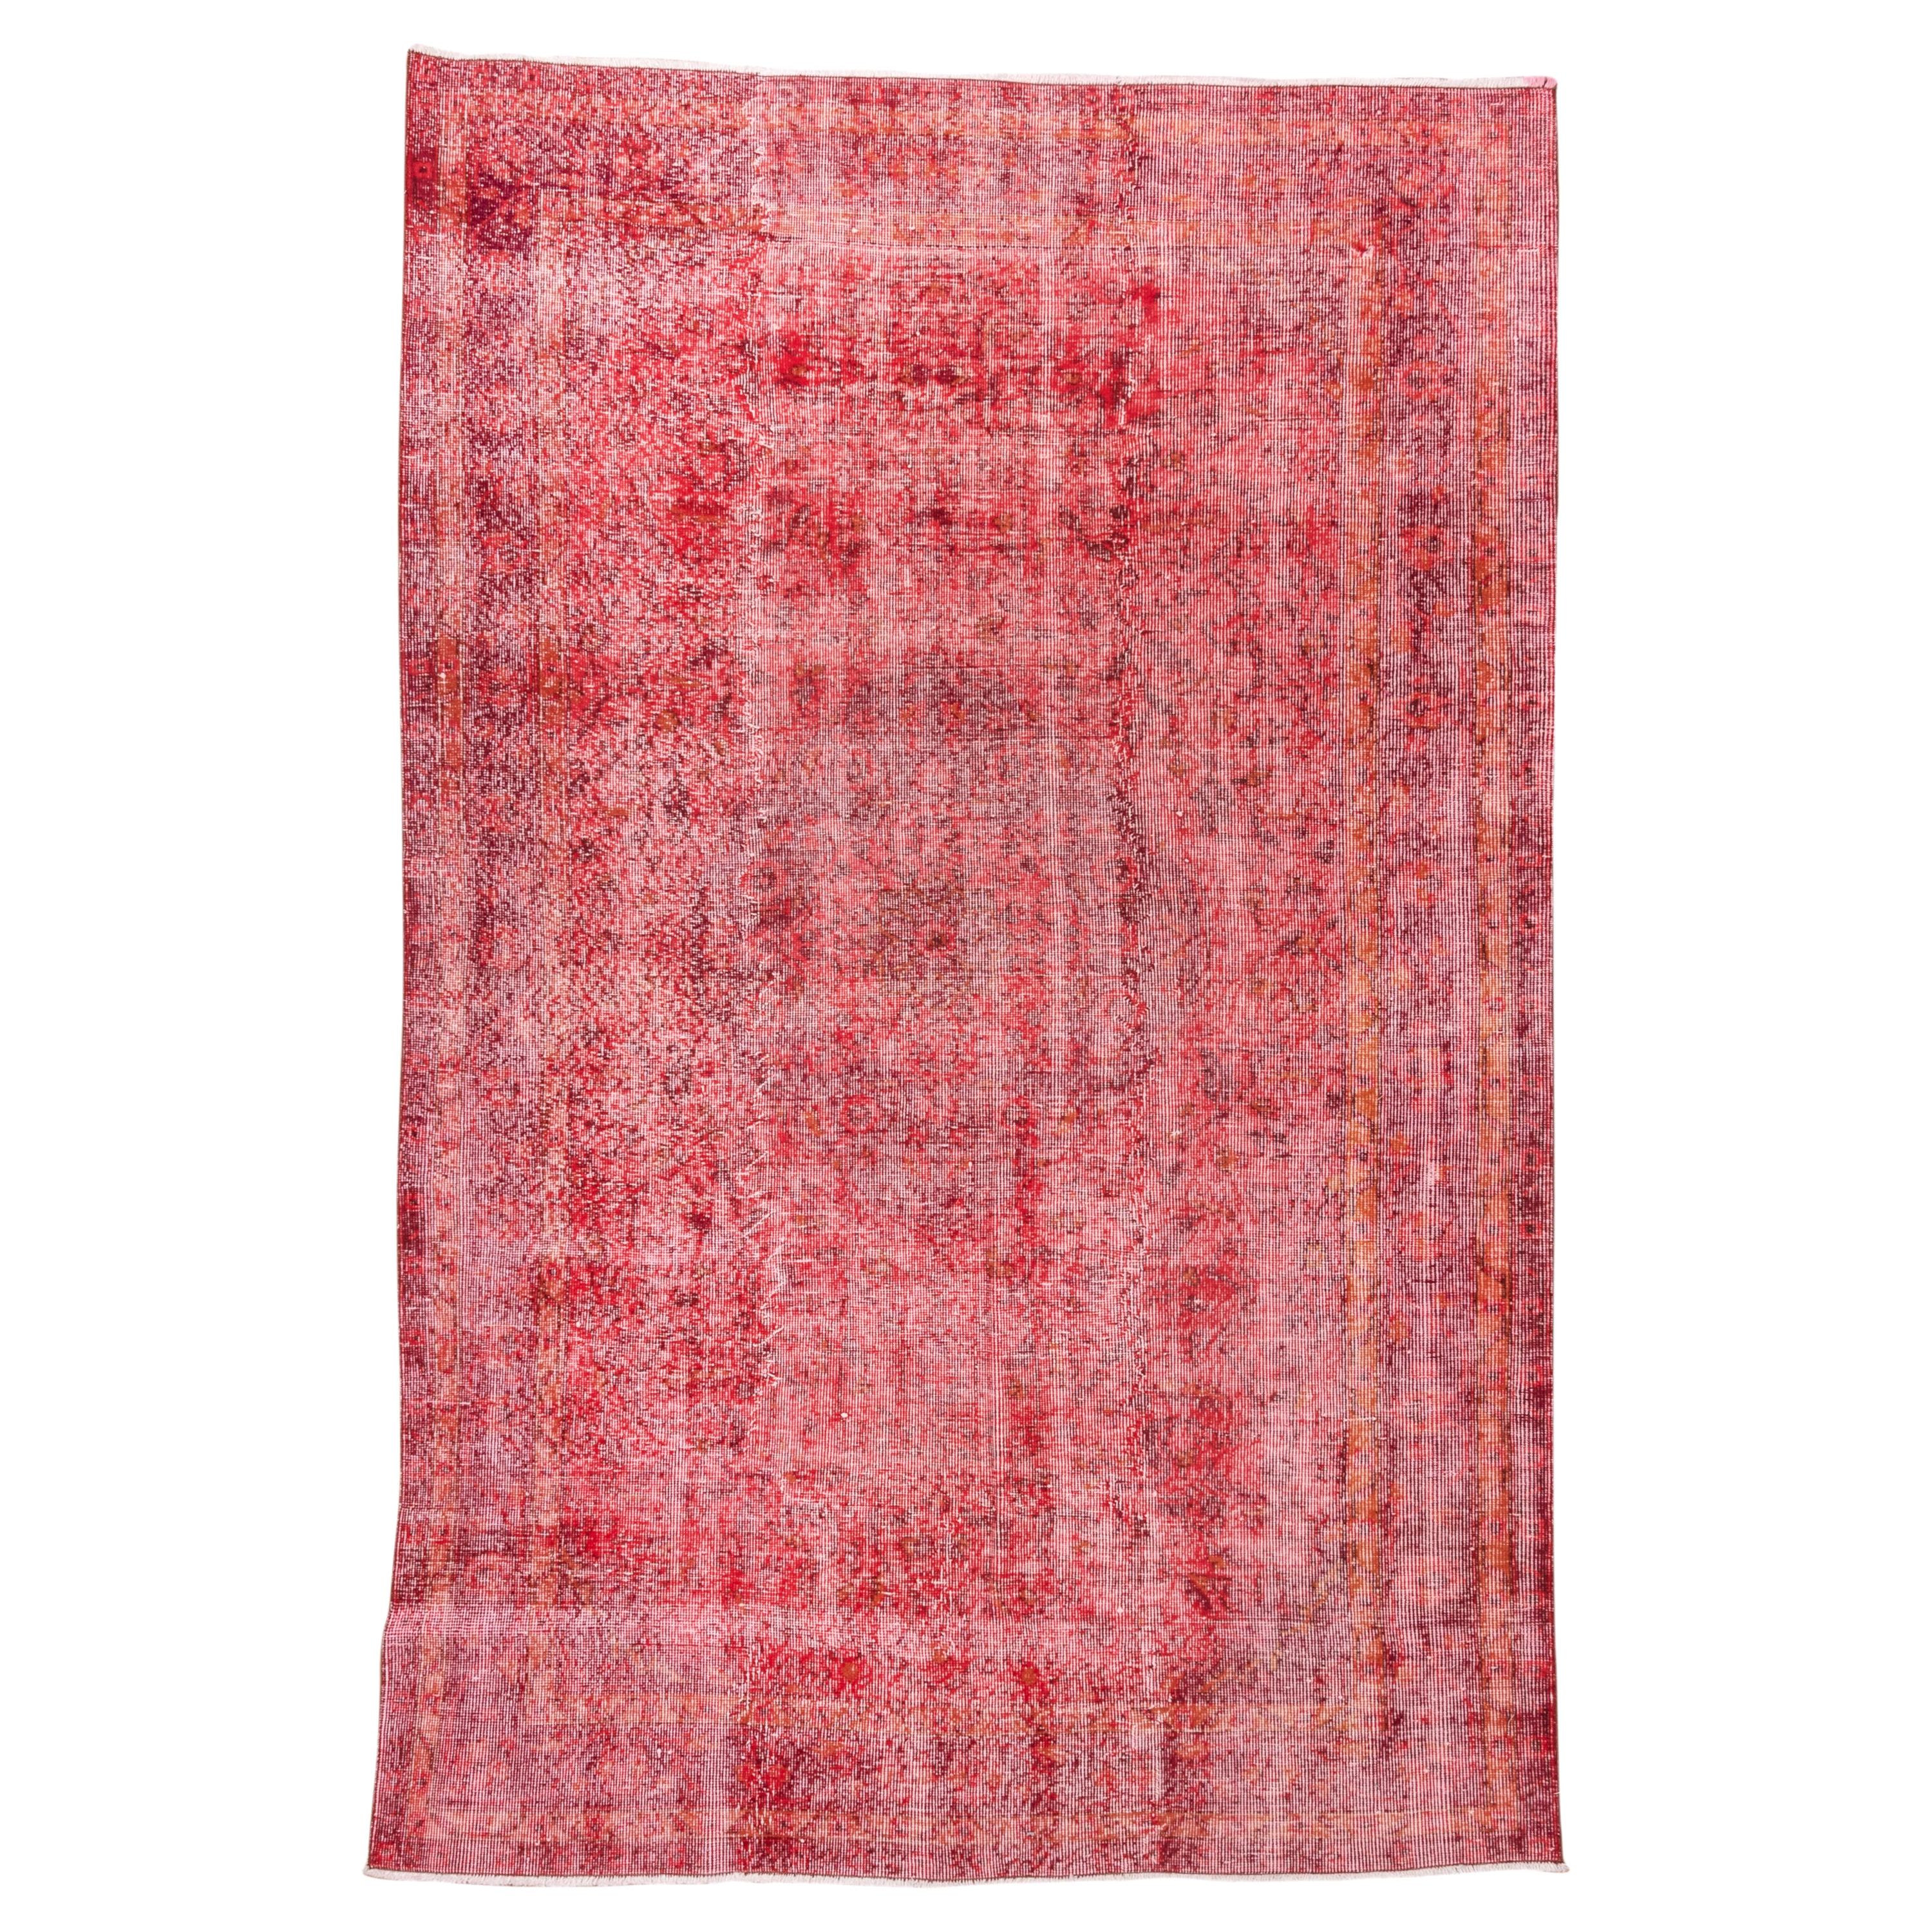 Vintage Red Overdyed Wool Rug, Shabby Chic For Sale